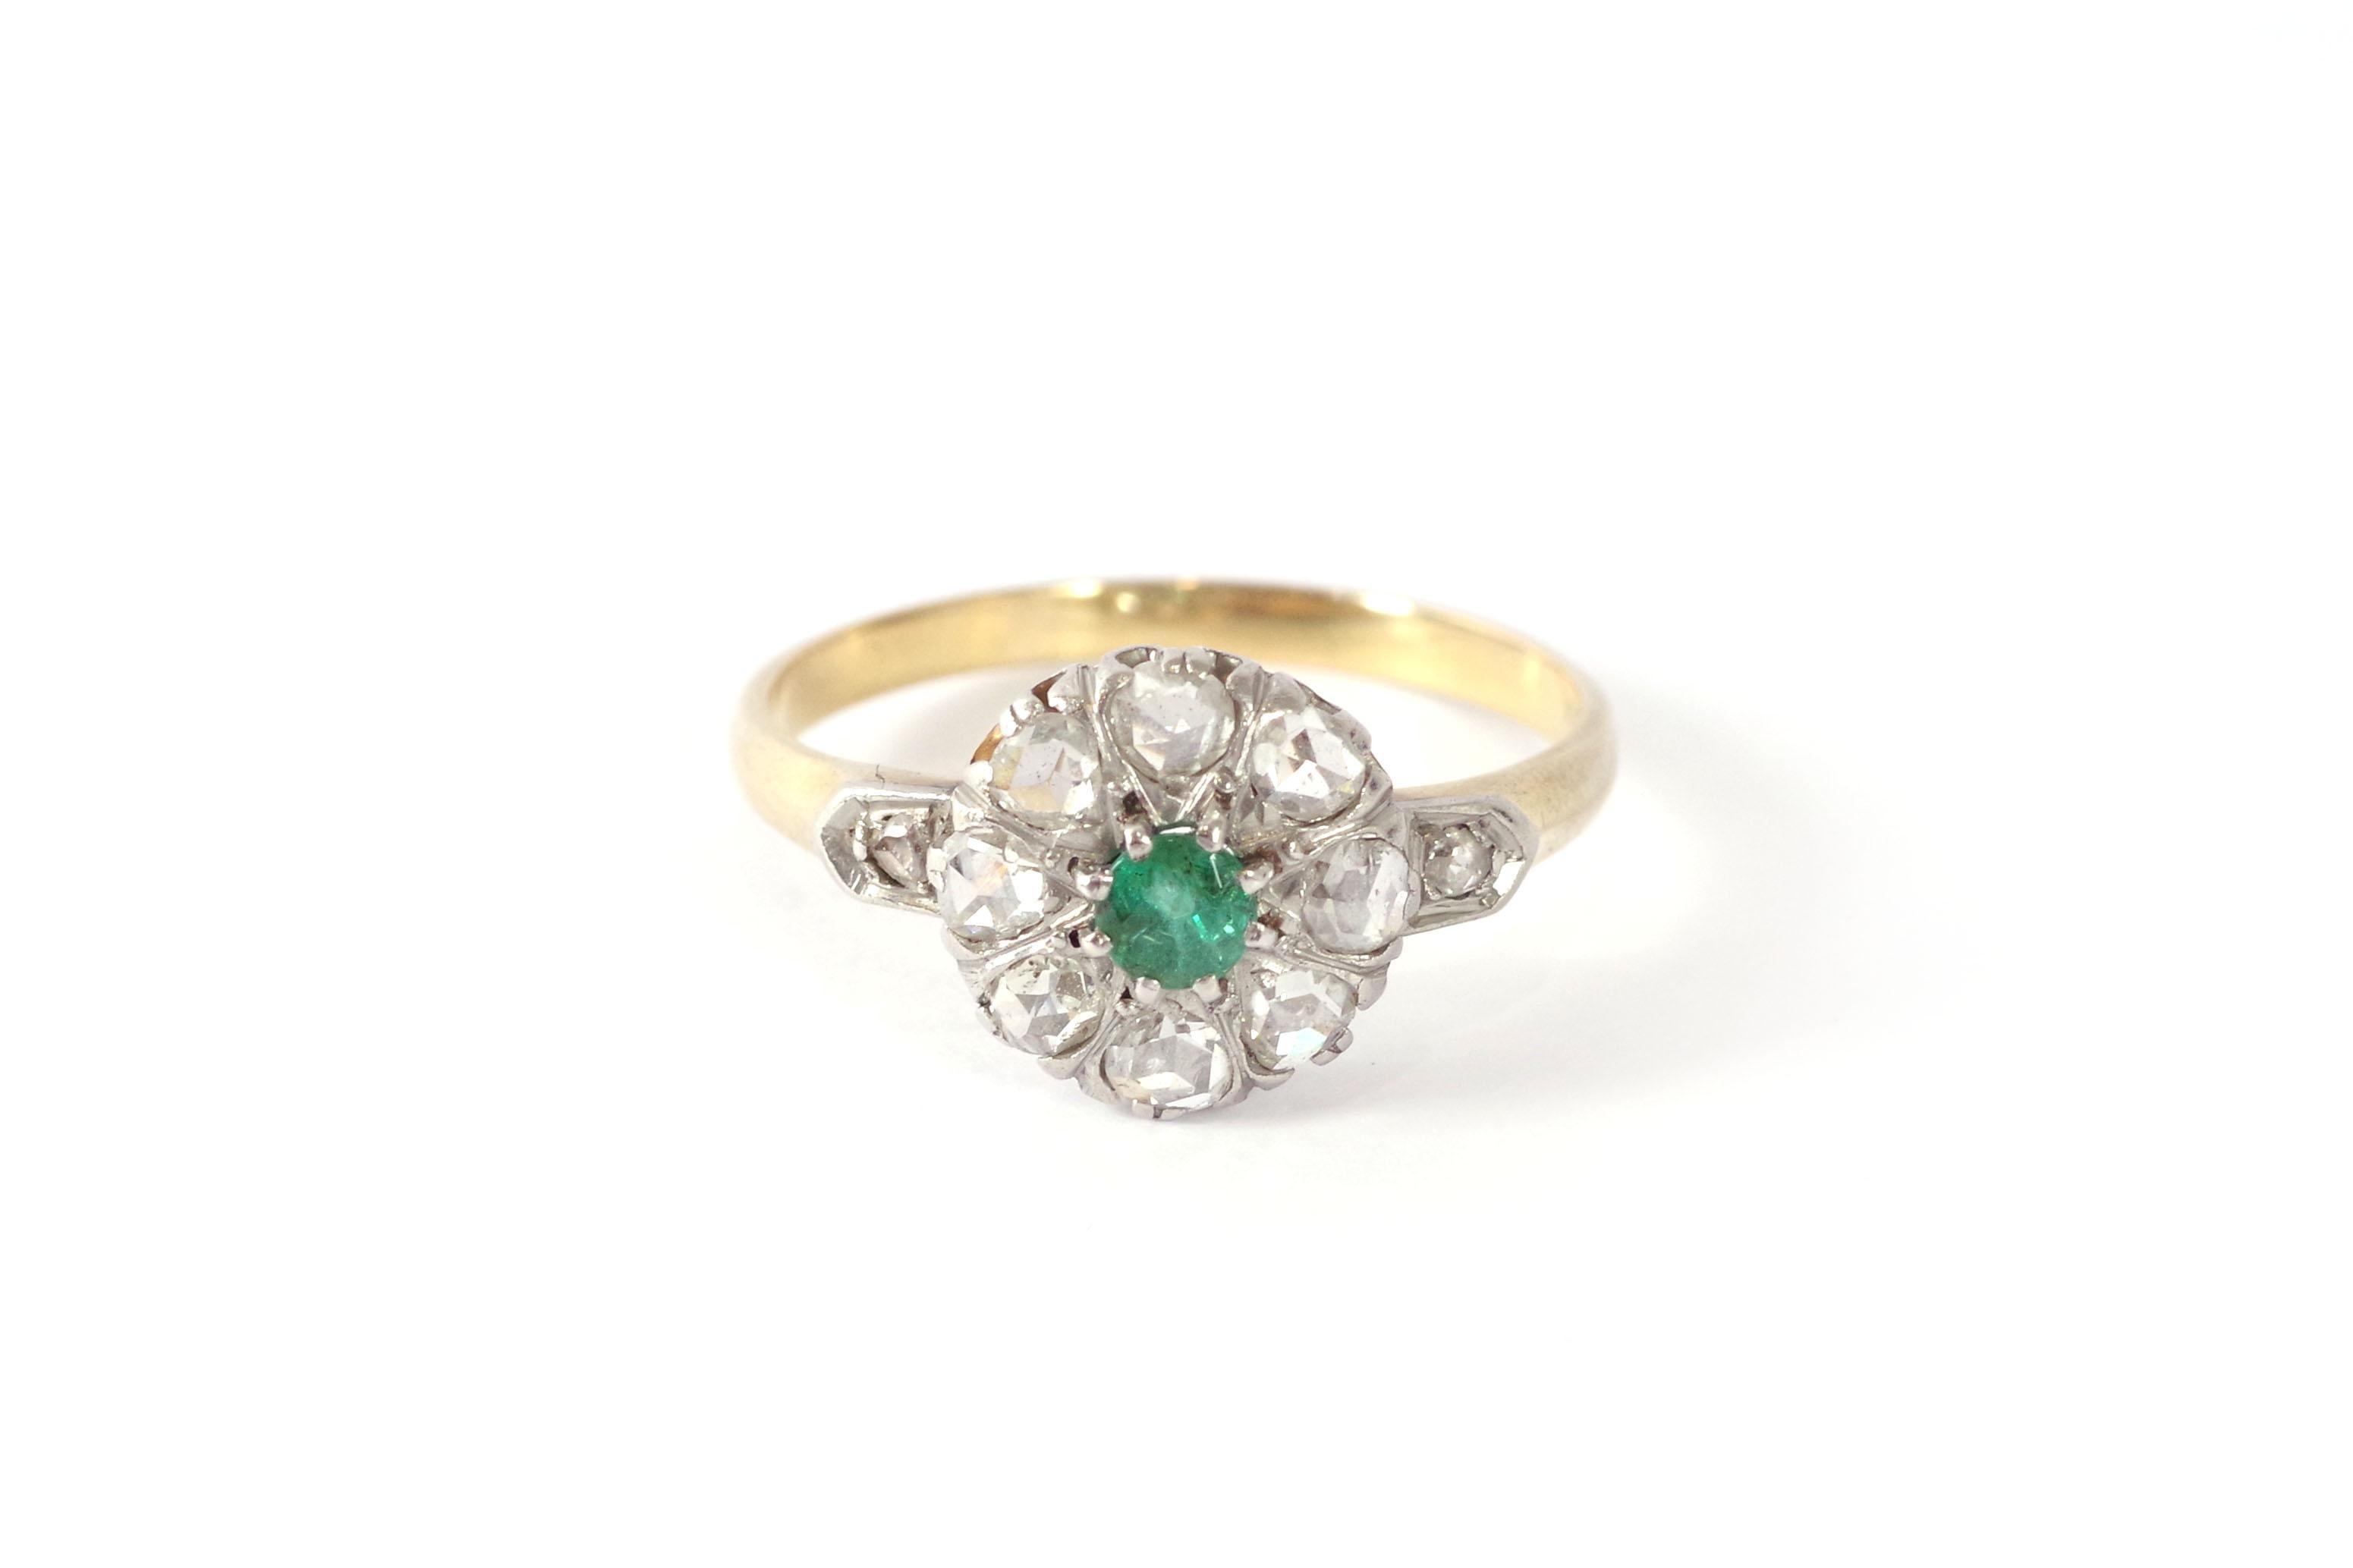 French cluster emerald ring in 18 karat pink gold and platinum. Antique cluster ring with a round-cut emerald set with eight claws. The emerald is surrounded by eight Dutch rose-cut diamonds. Each shoulder of the ring is also set with a diamond.